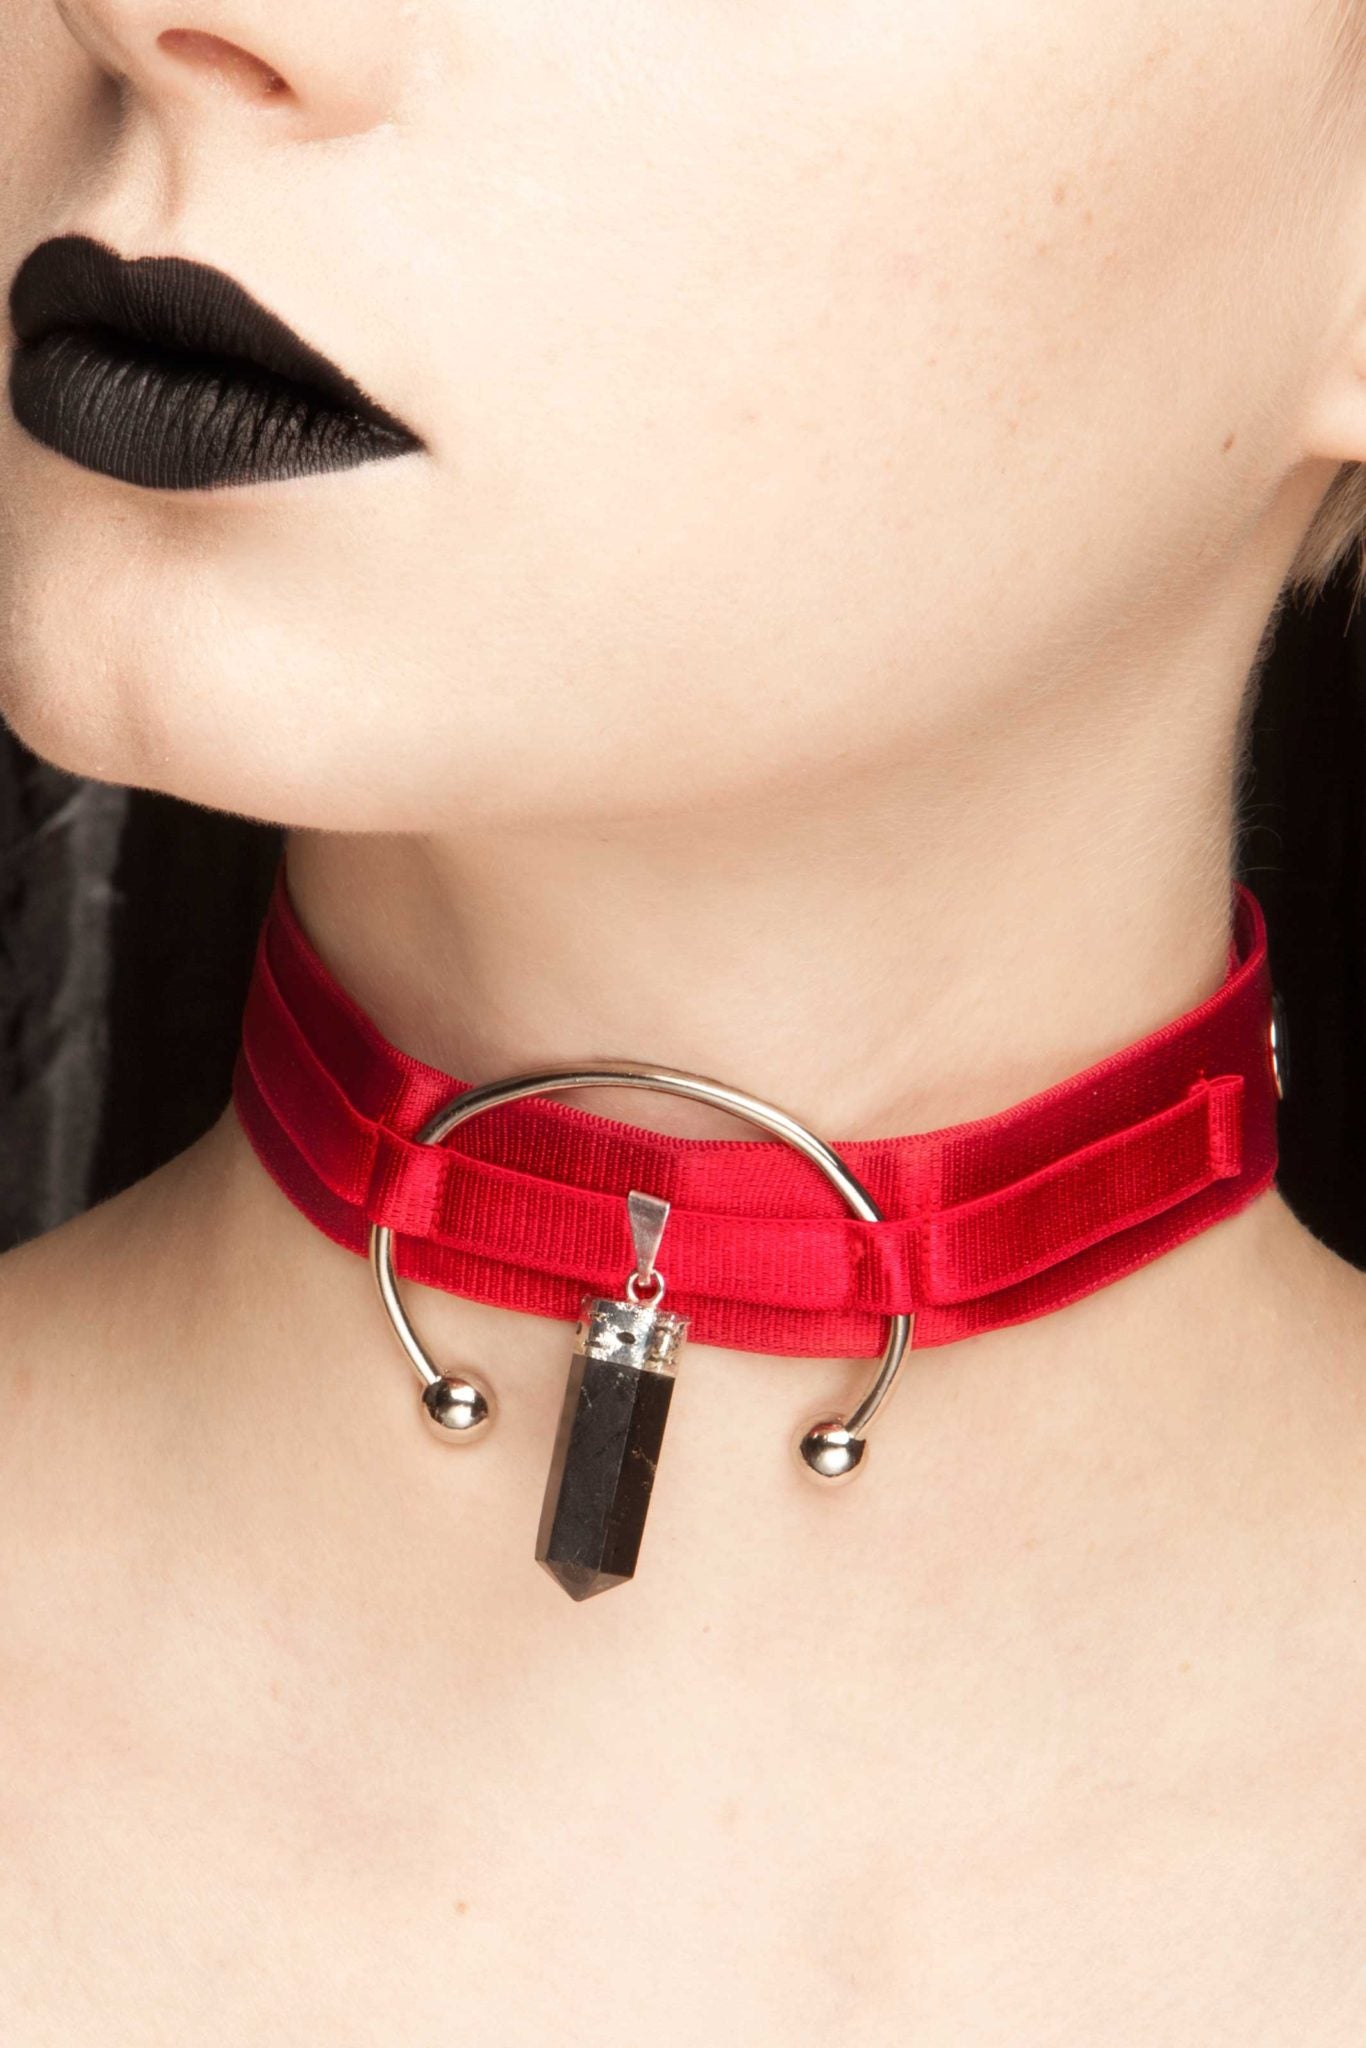 triple goddess choker in bloodbath red with black only pendant